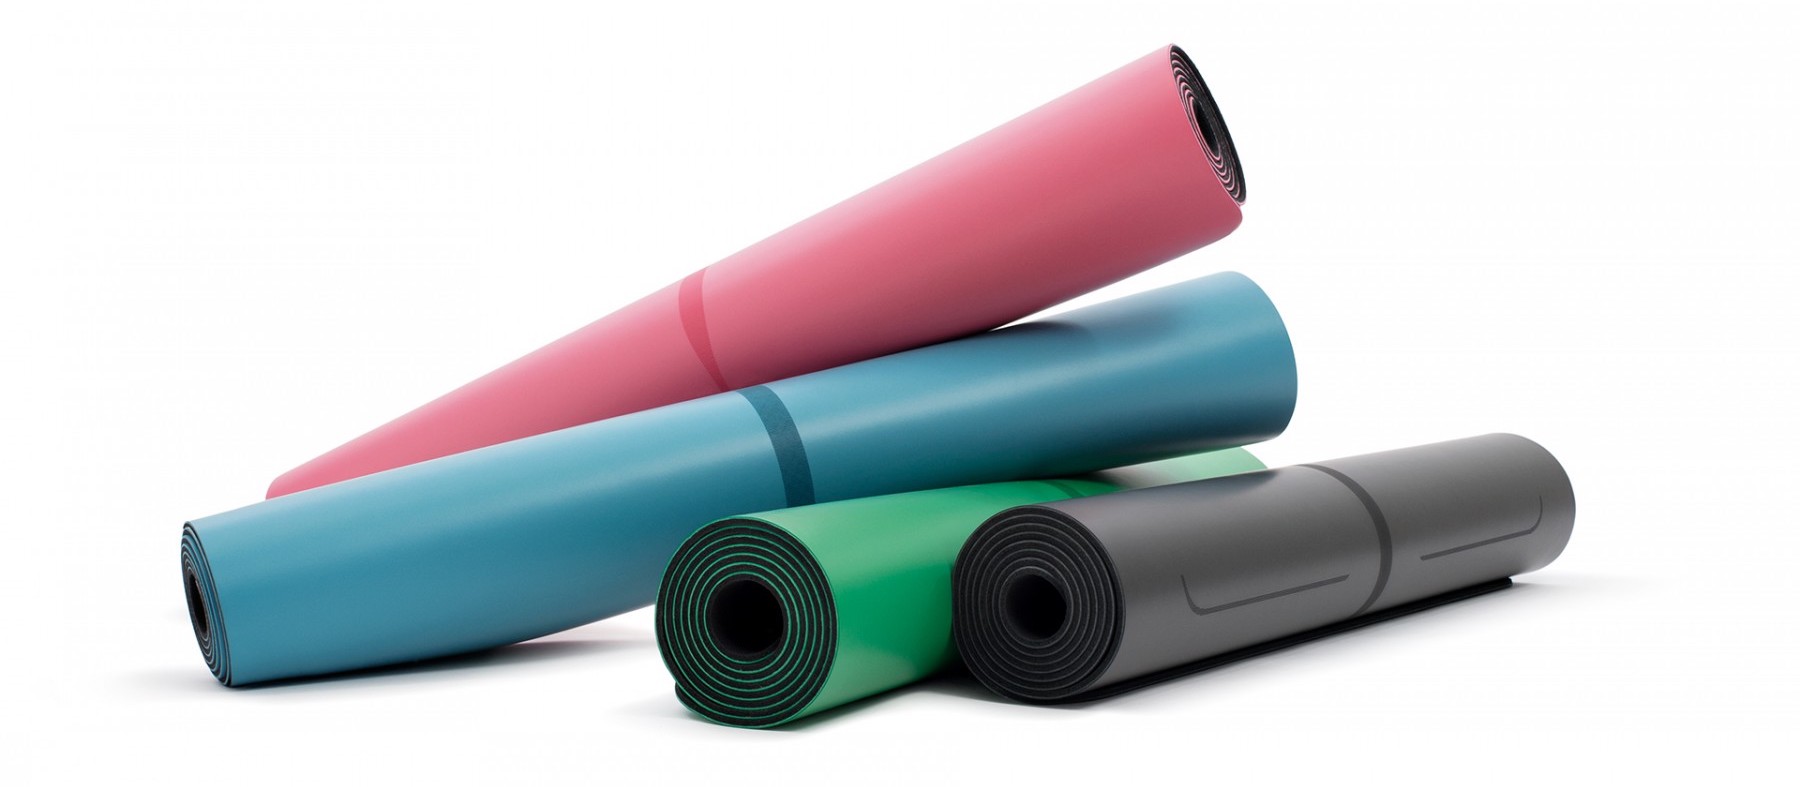 Liforme Extra Large Yoga Mats: More Of A Good Thing